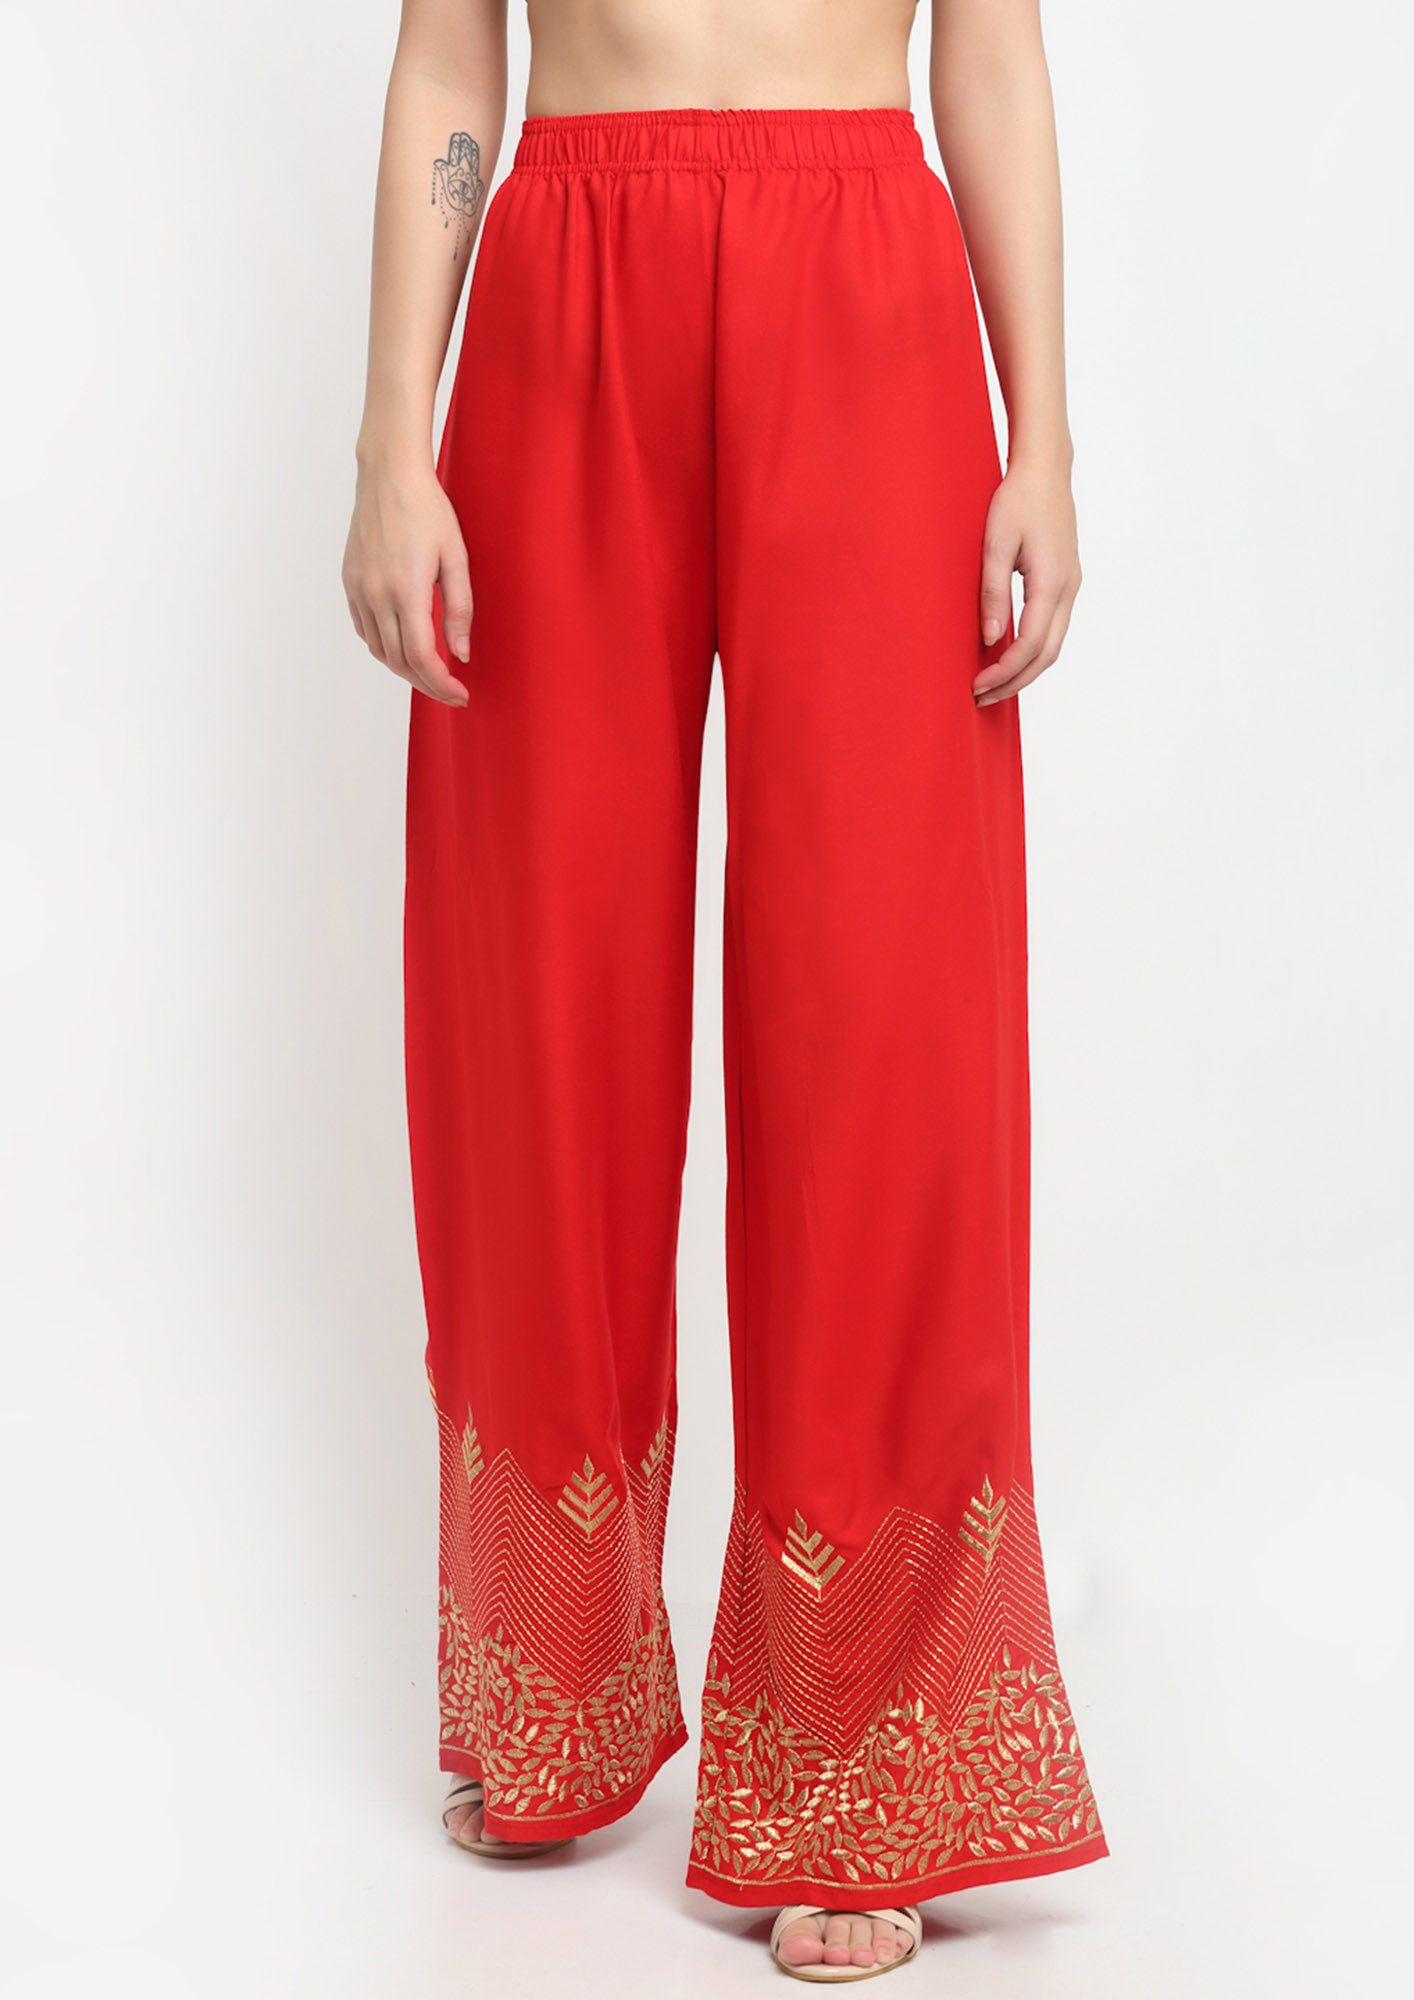 NEUDIS Golden Thread Embroidered Wide Leg Flared Palazzo For Women & Girls - Red